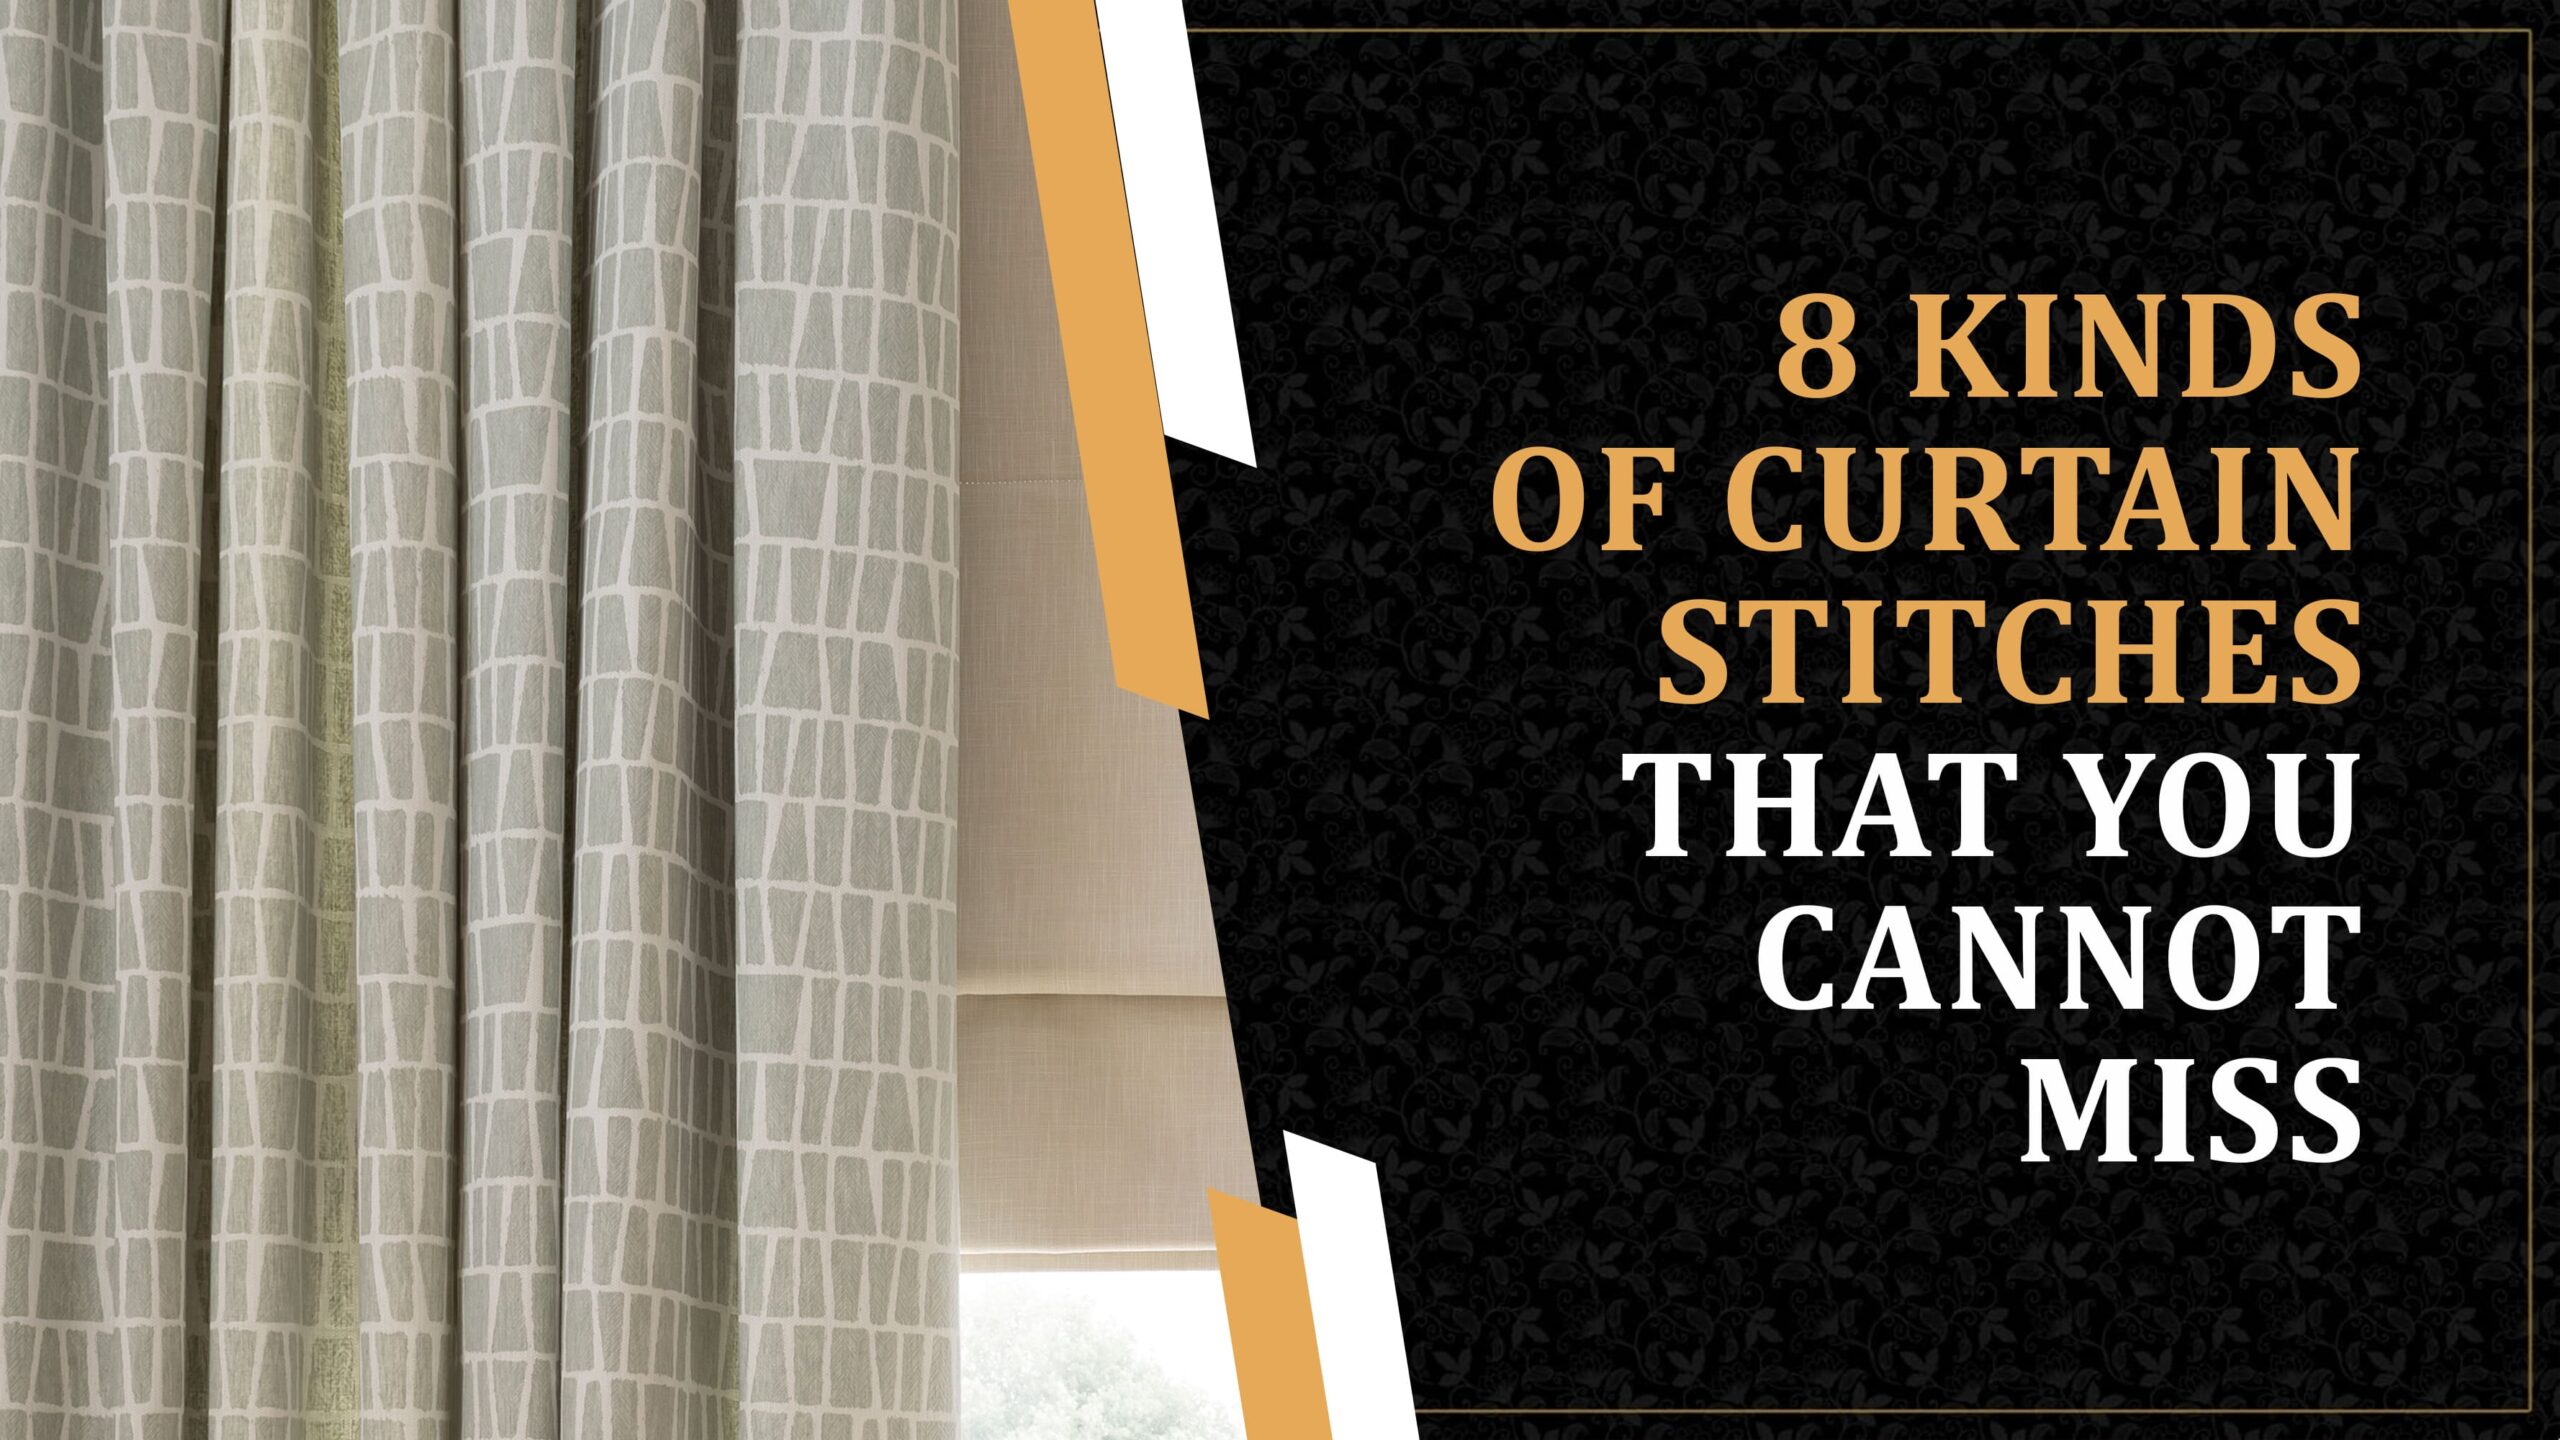 8 Kinds of Curtain Stitches that You Cannot Miss